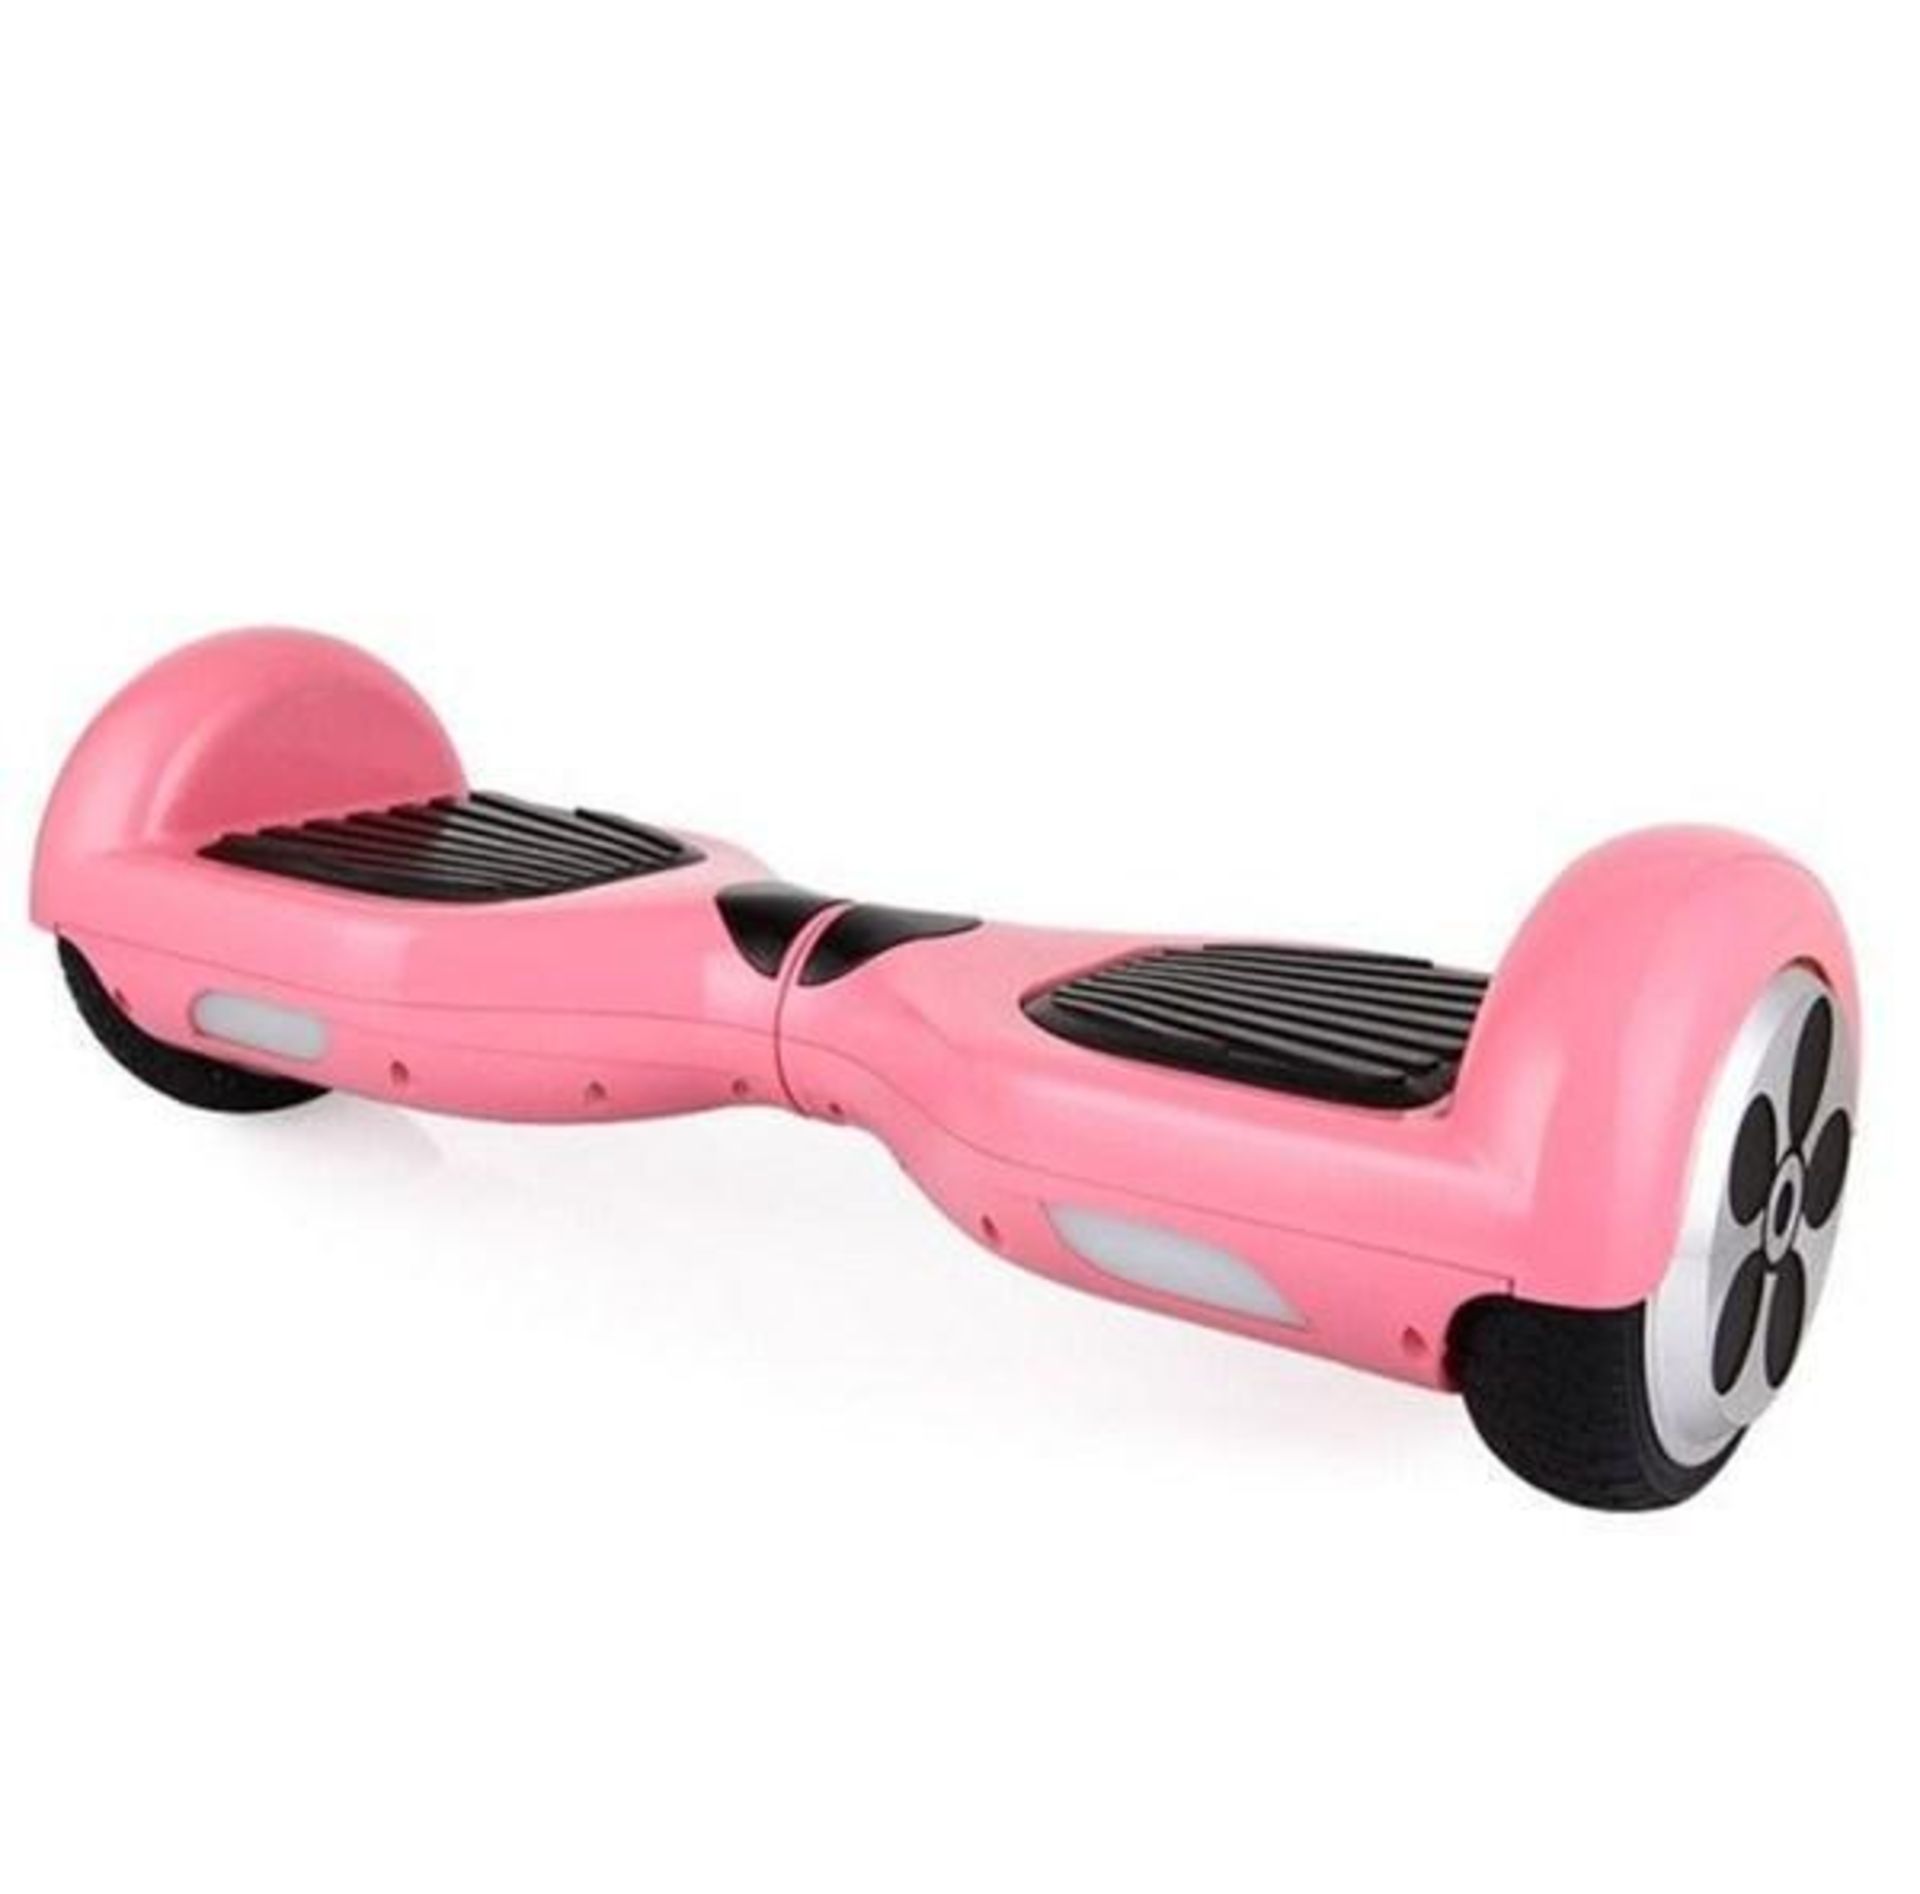 7" Powerboard In Limited Edition Pink (Please See Description For Full Specification)